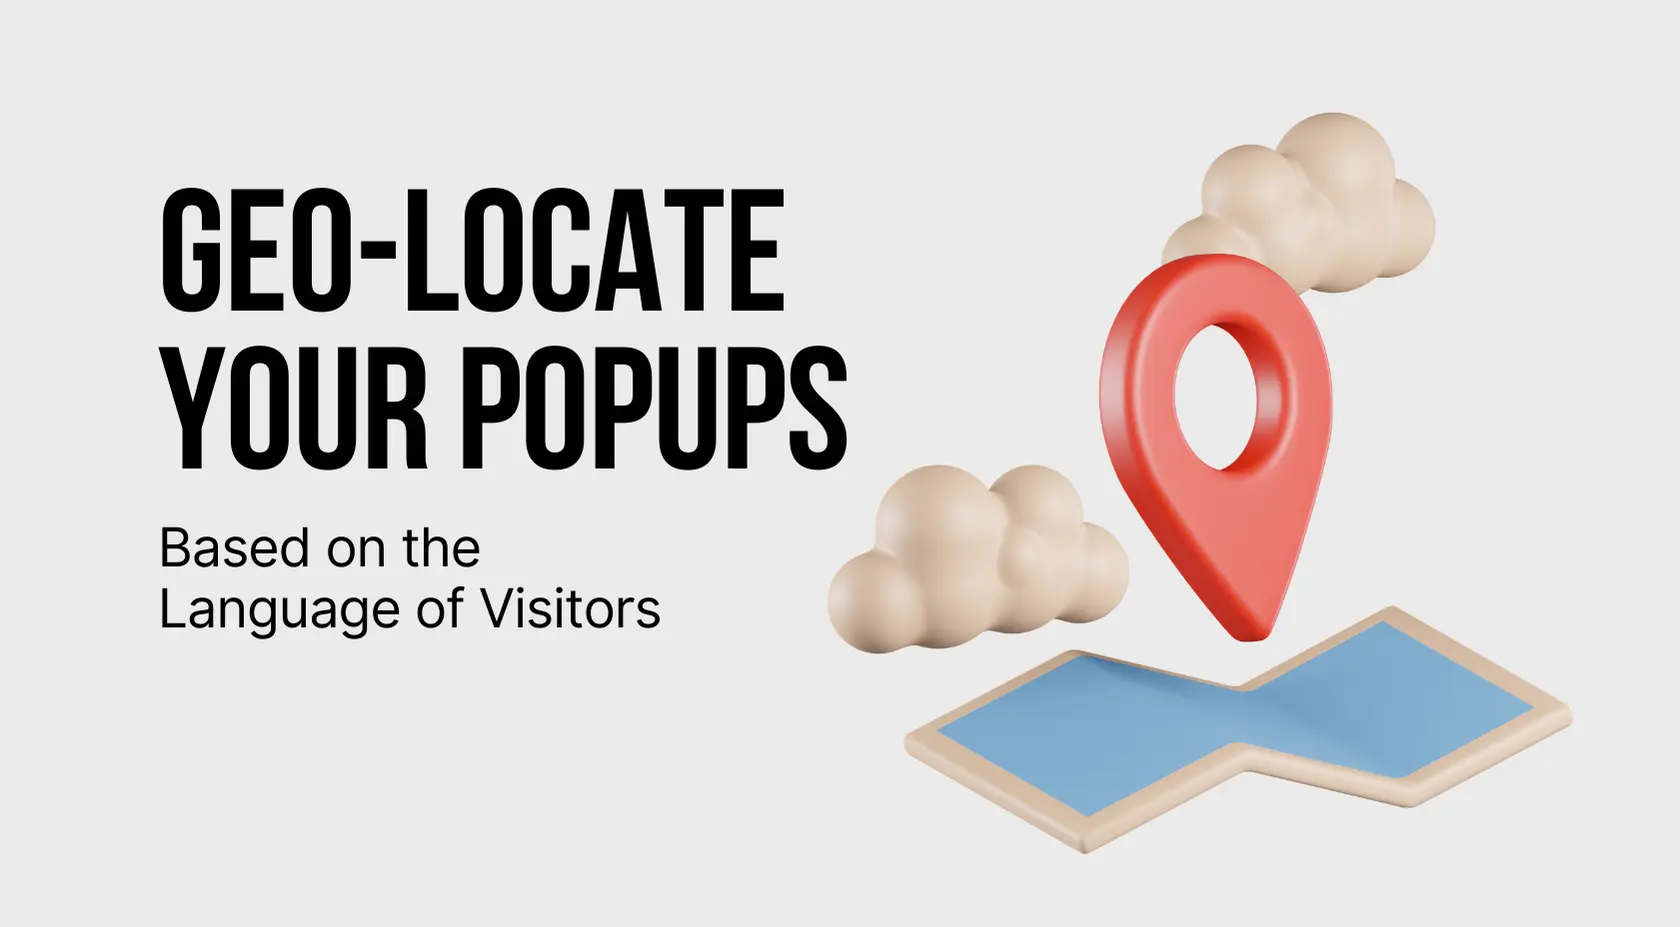 Geo-Locate Your Popups Based on the Language of Visitors